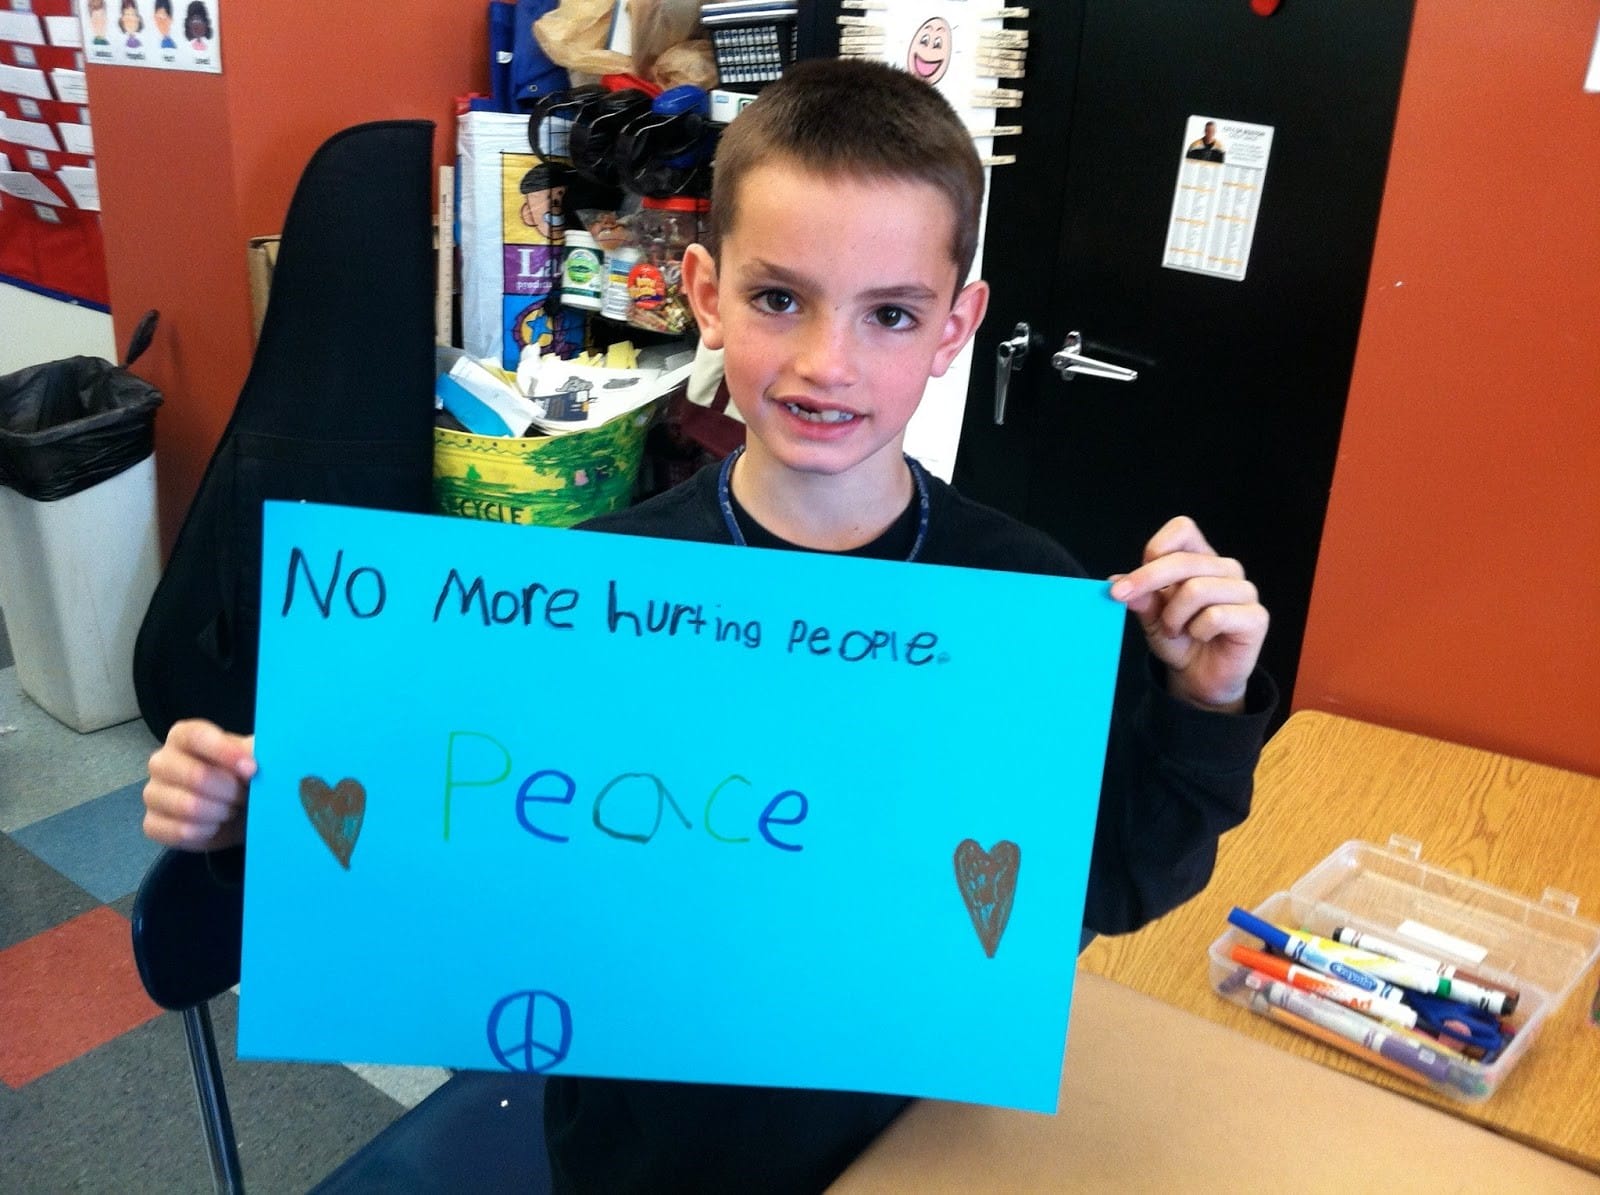 The Martin Richard Bridge Builder campaign is intended to continue spreading Martin’s belief of bringing people together by challenging kids, teens and families across the country to spread peace through service projects or simple acts of kindness.